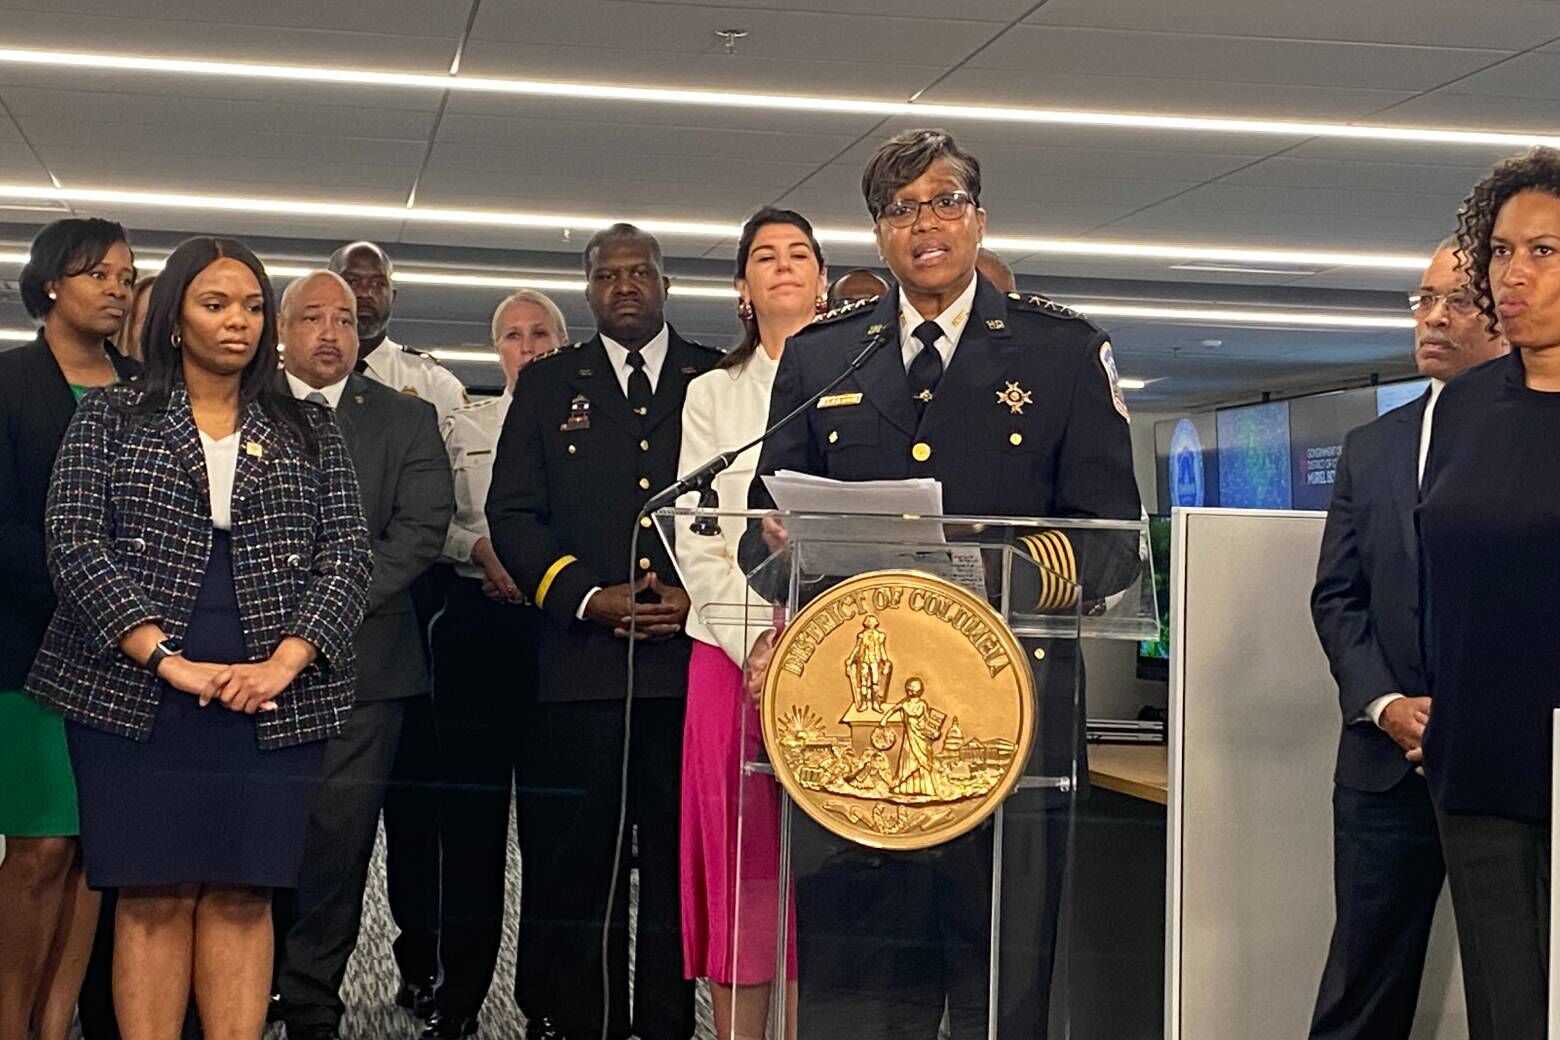 D.C. officials, including Police Chief Pamela Smith, cut the ribbon the new Real Time Crime Center. (WTOP/John Domen)